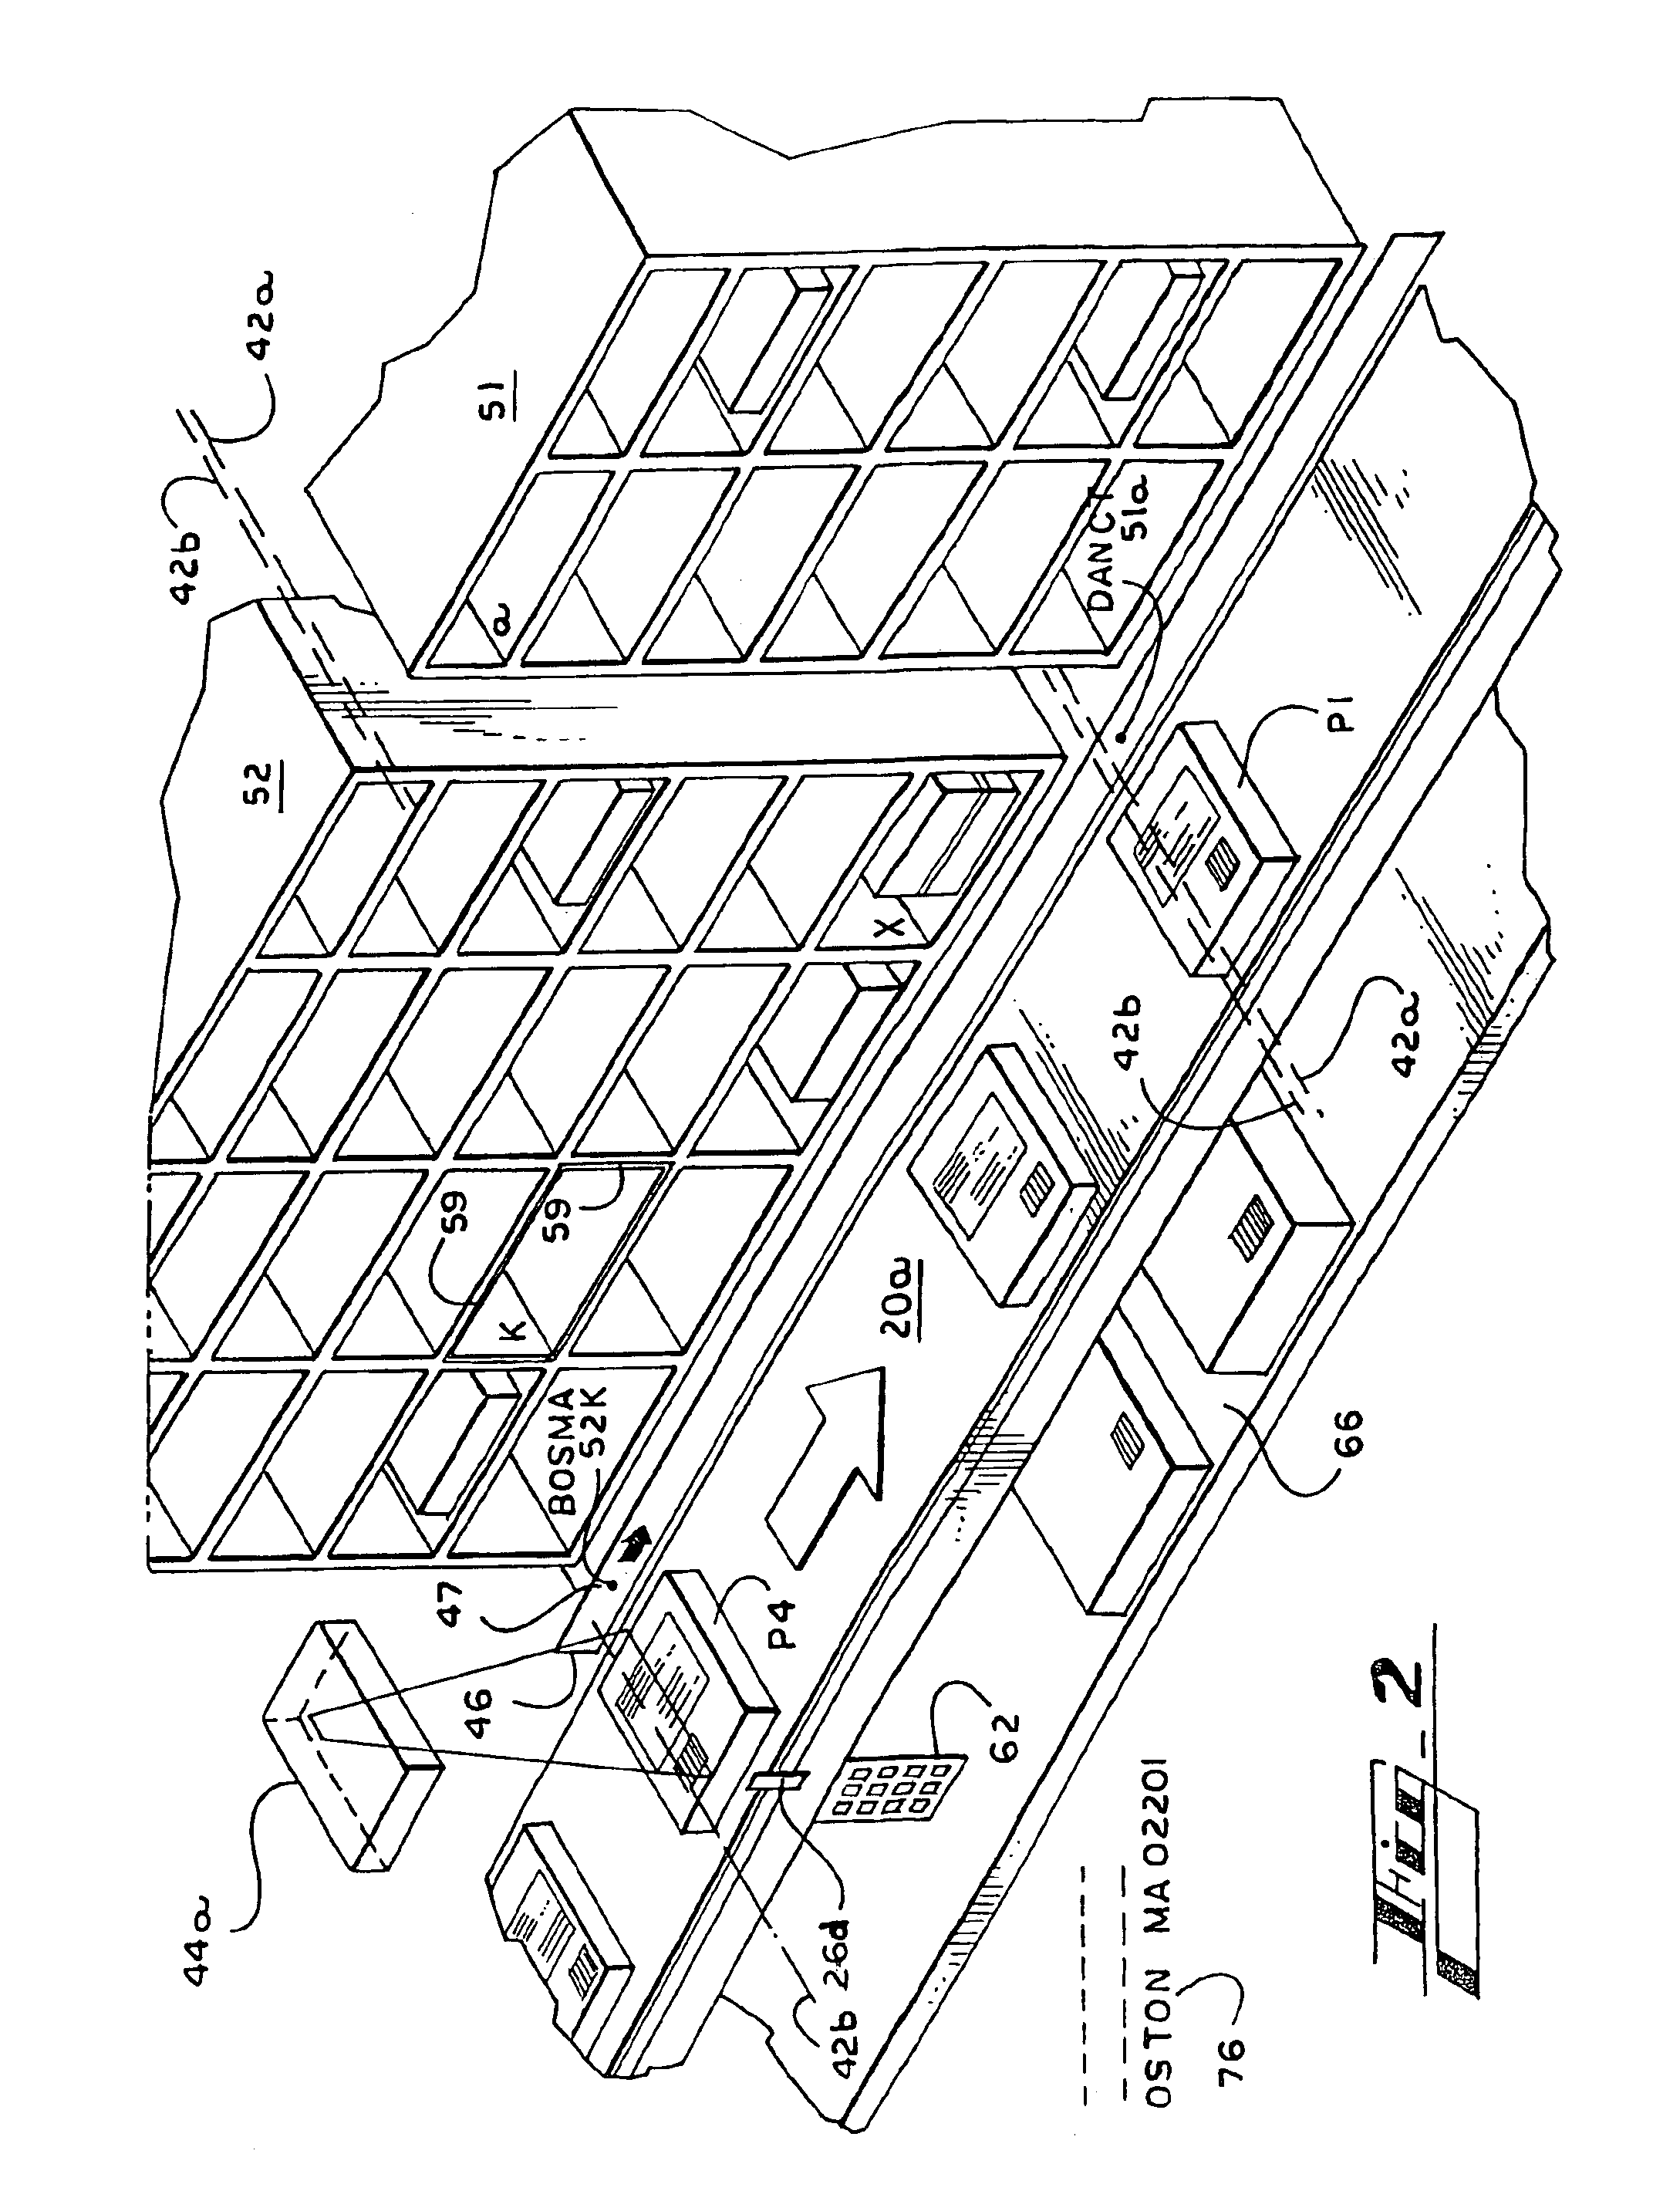 Synchronous semi-automatic parallel sorting